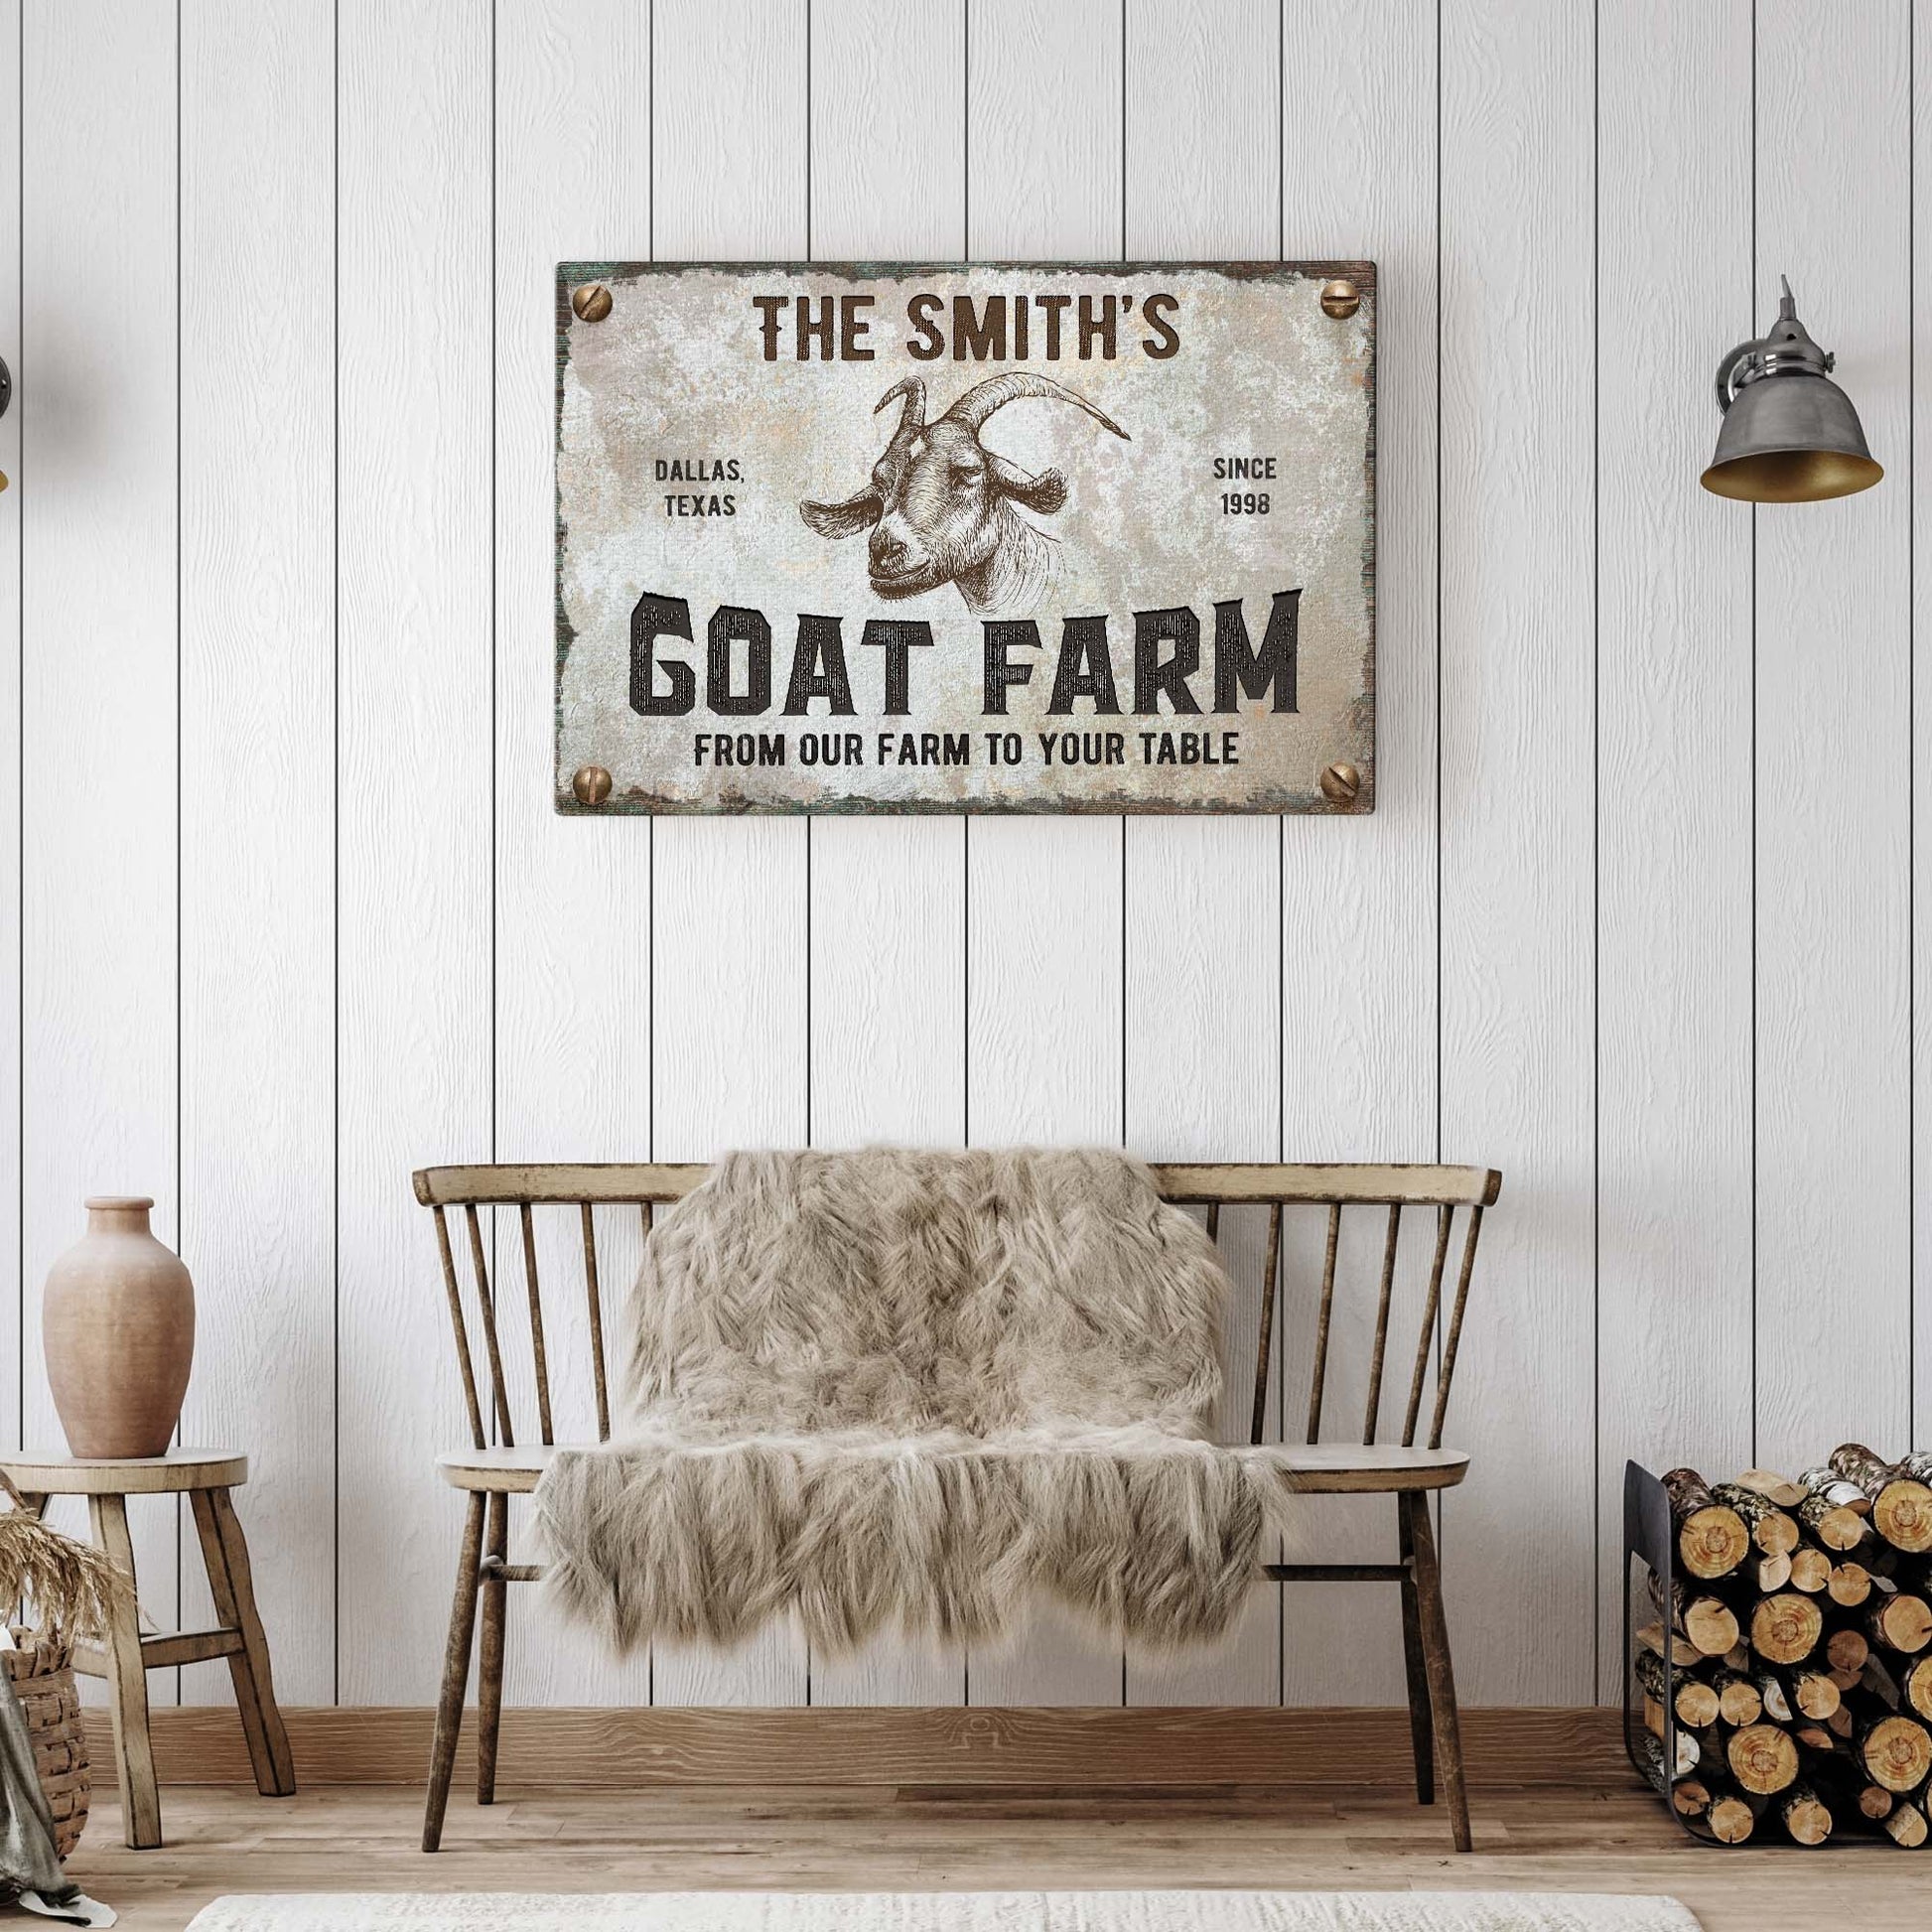 From Our Farm To Your Table Goat Farm Sign Style 1 - Image by Tailored Canvases